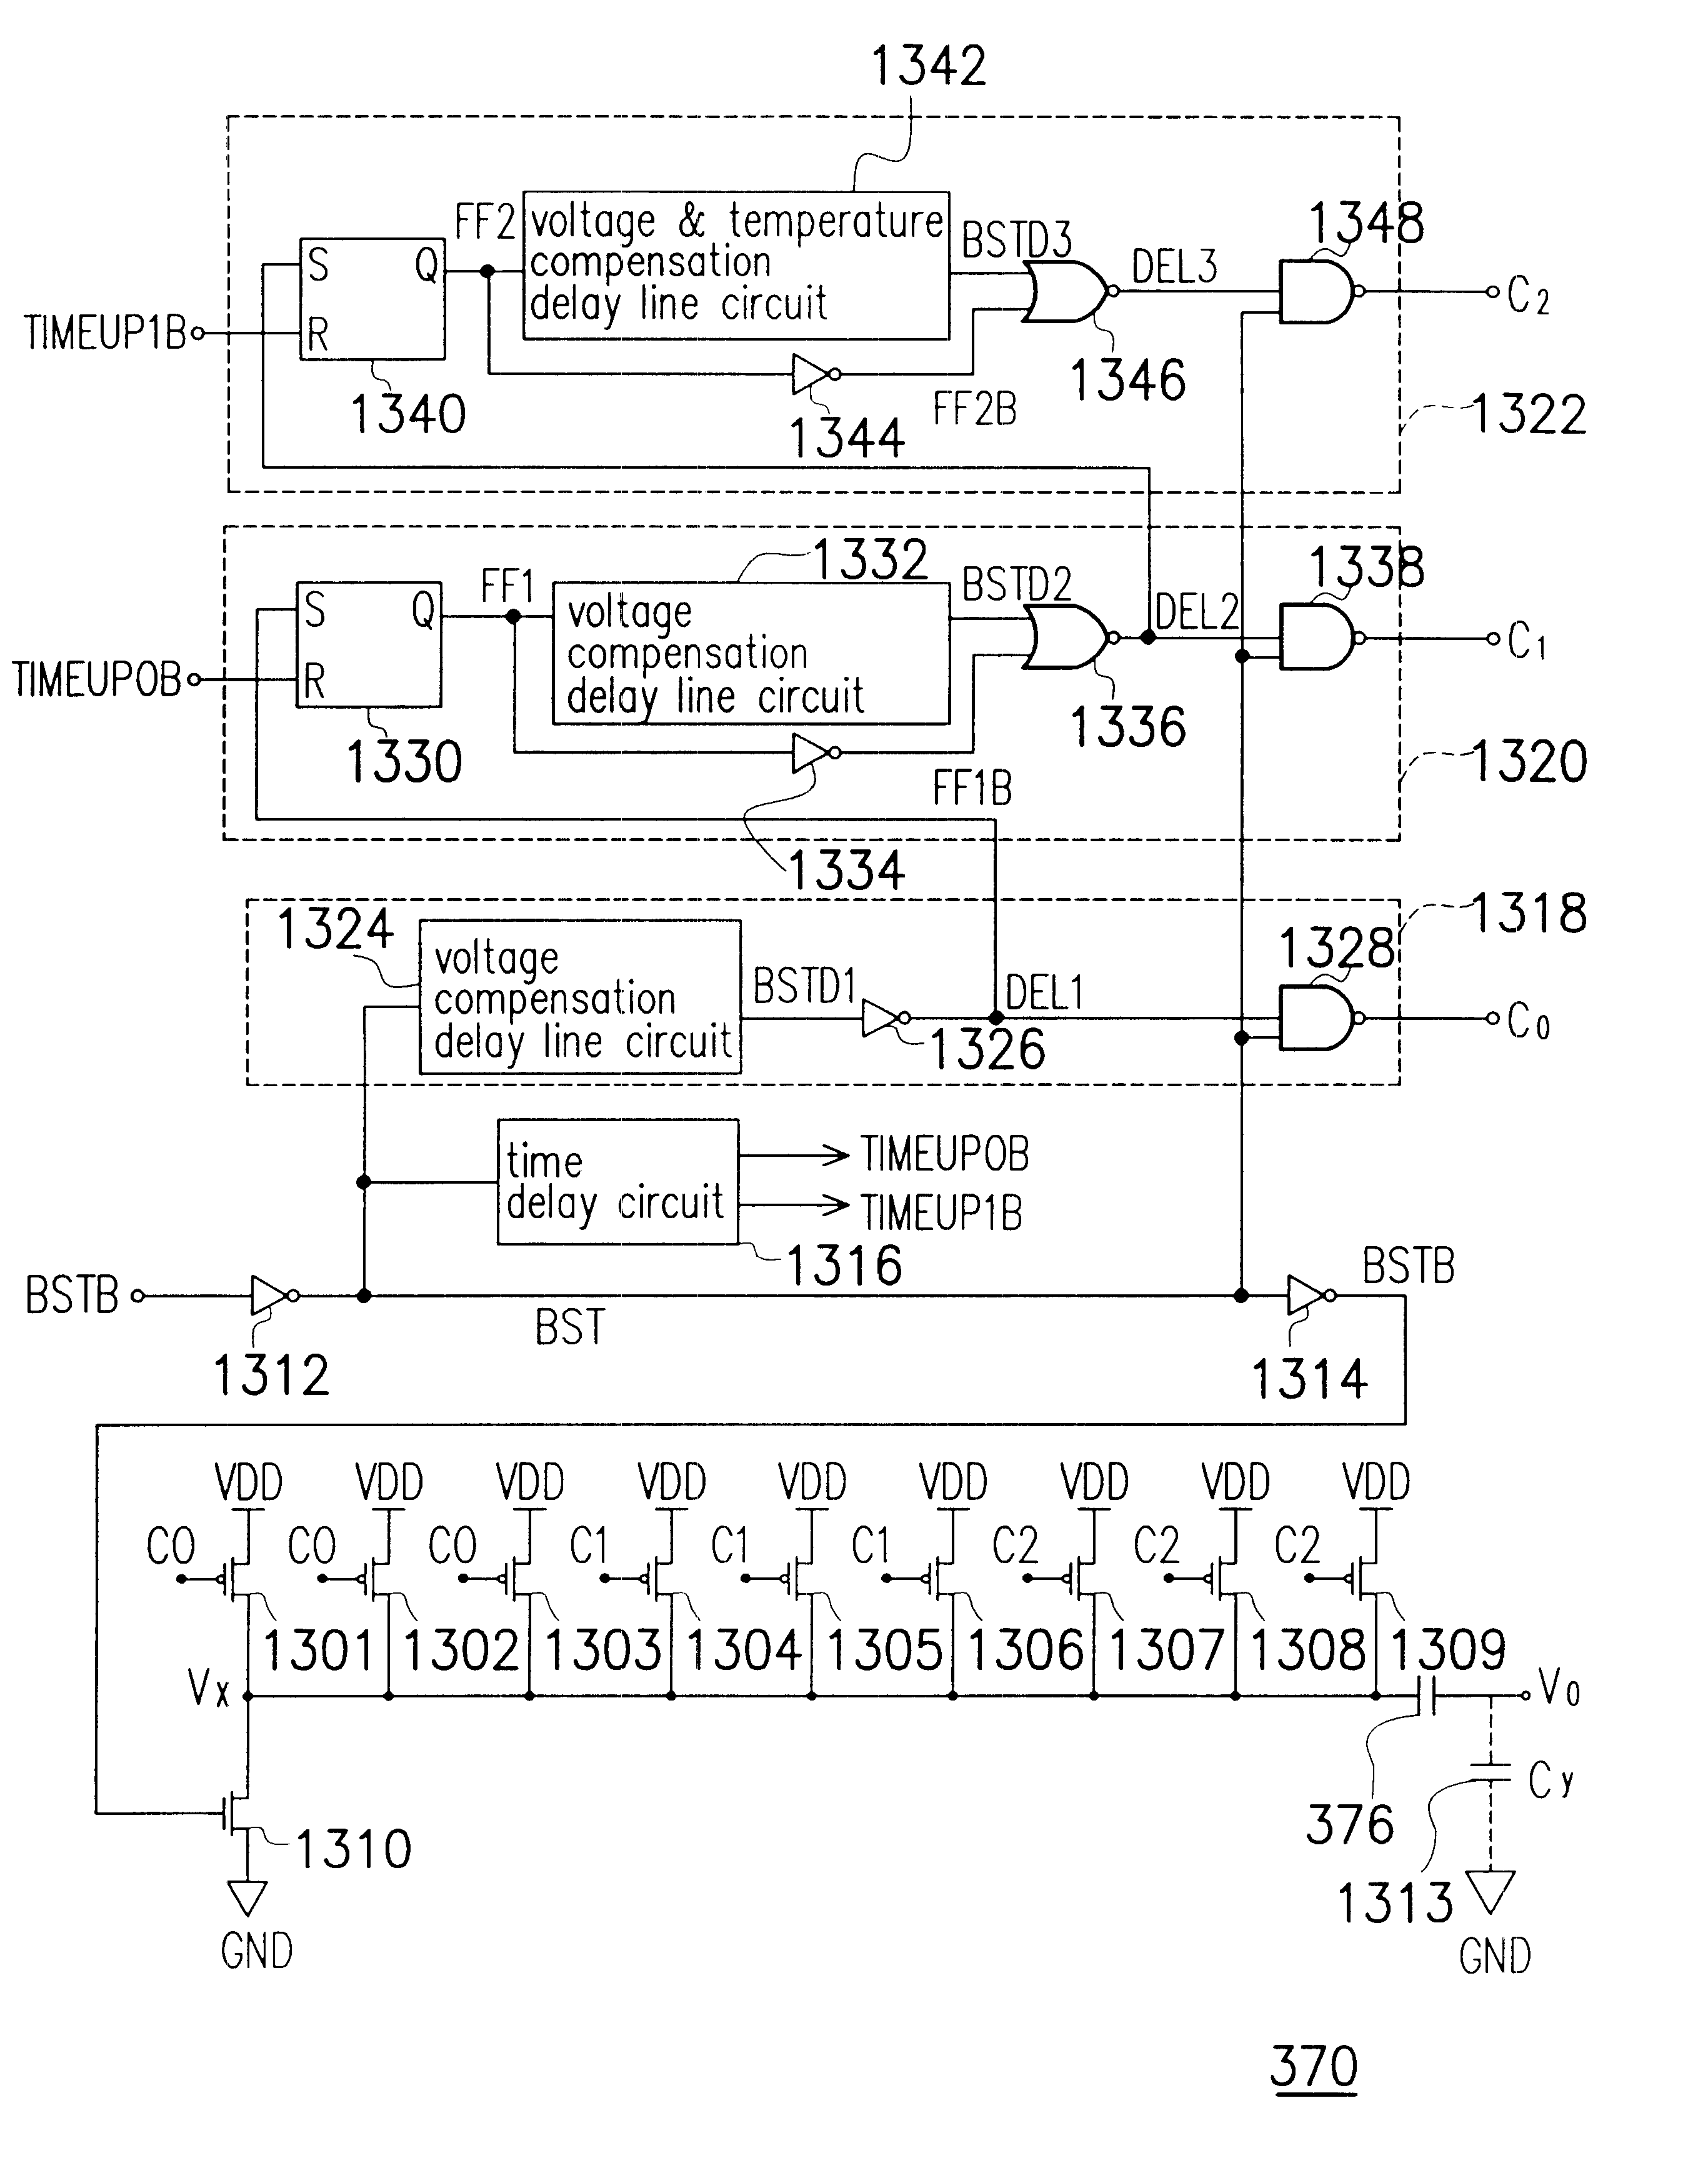 Voltage-boosting generator for reducing effects due to operating voltage variation and temperature change